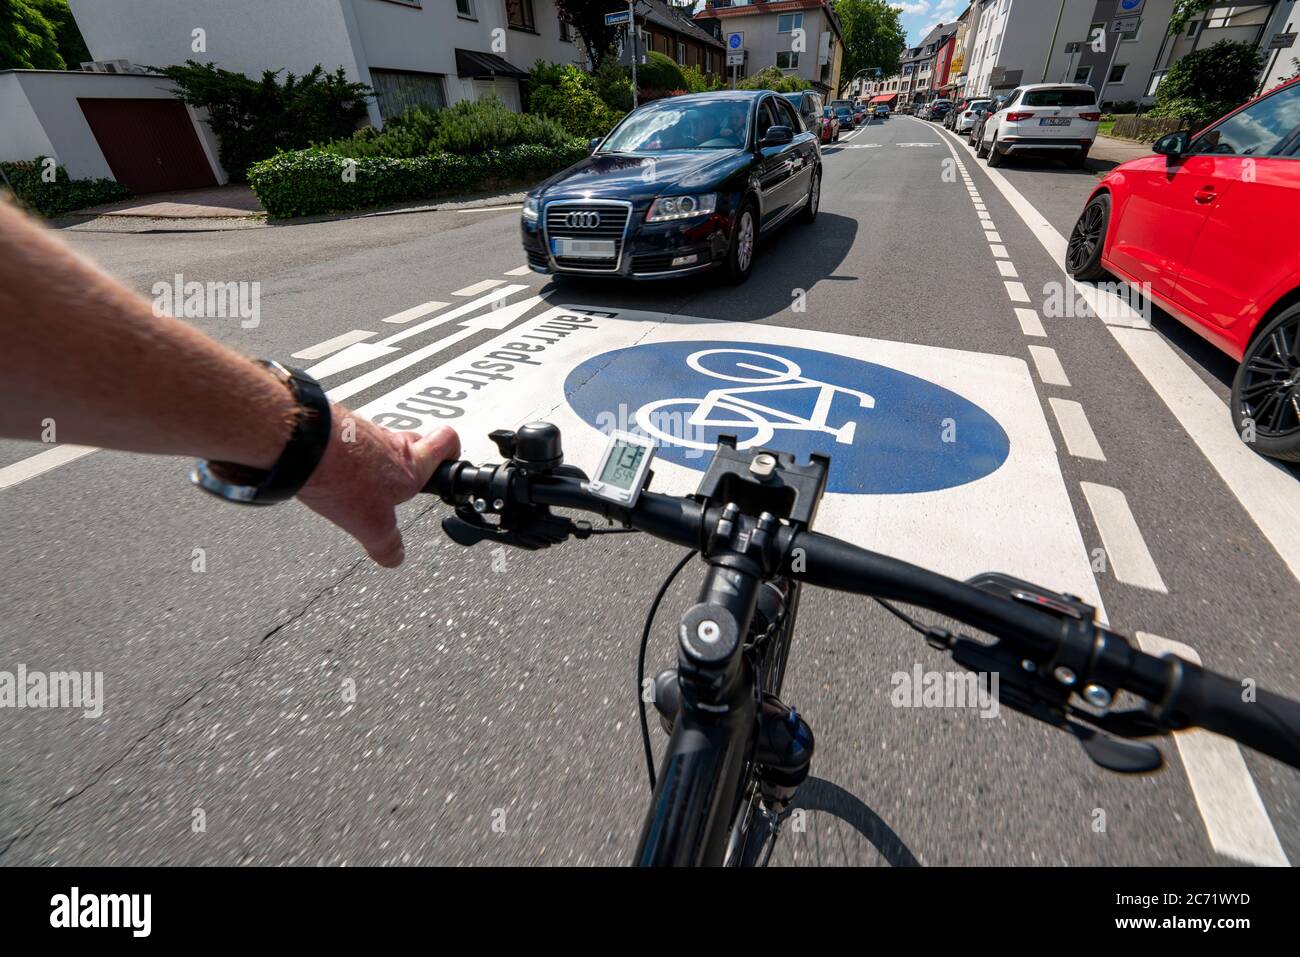 Bicycle road, cyclists have priority over car traffic, new bicycle axes through Essen, here in the district of Rüttenscheid, Kahrstrasse, part of the Stock Photo